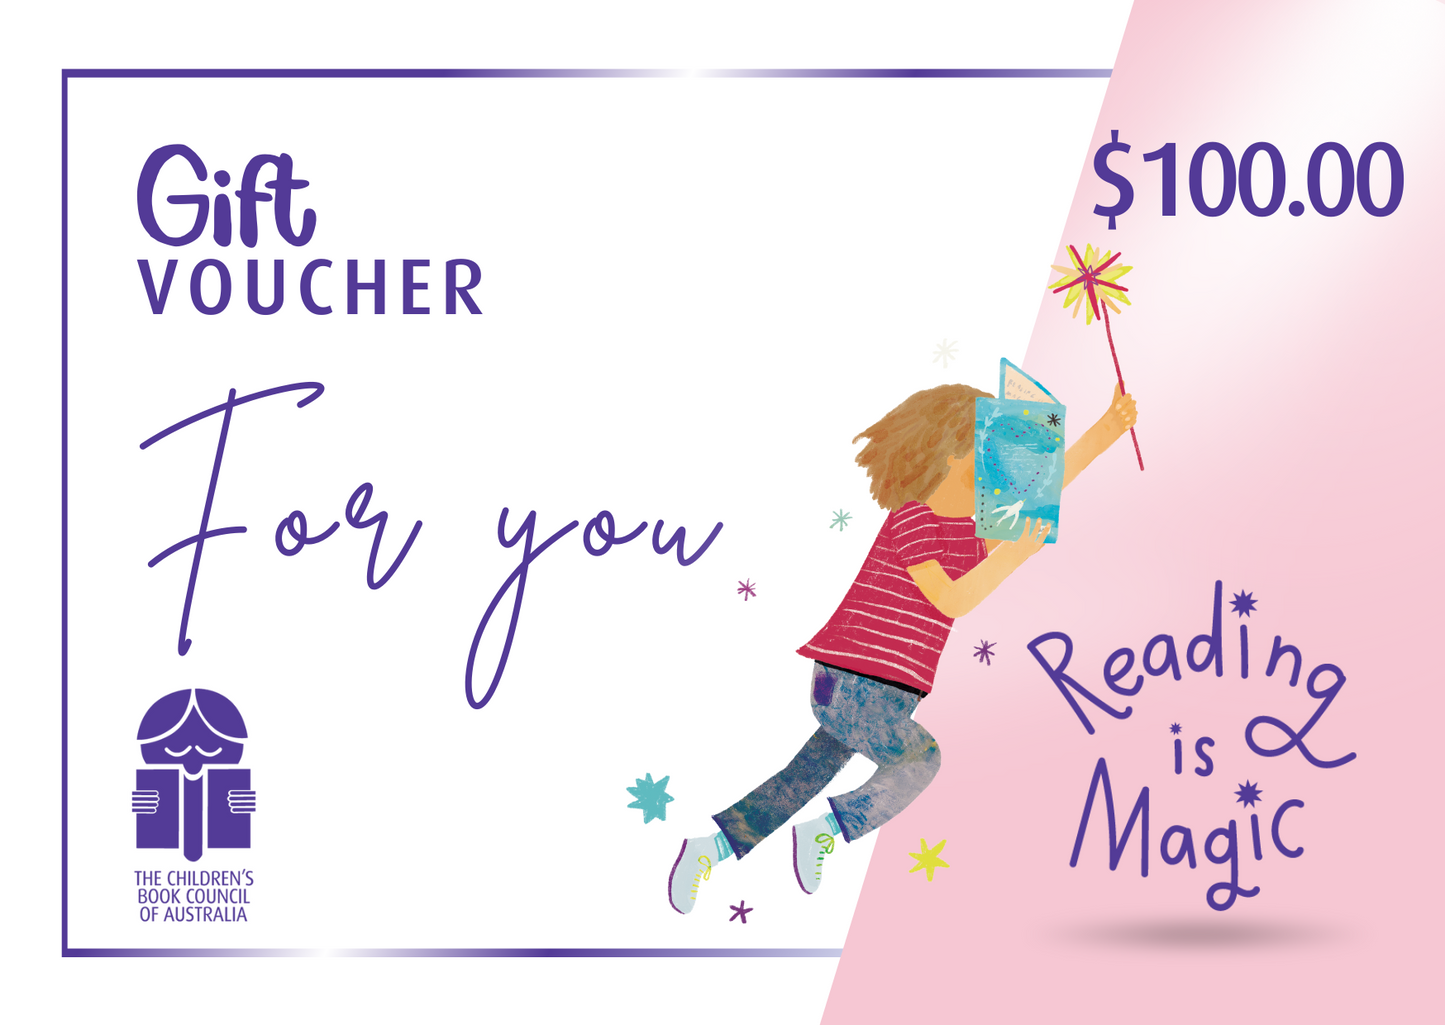 An image of a 100 dollar gift voucher, with the CBCA logo in the lower left corner and an illustration of a child in profile reading from a book being held in one hand and a wand upwards in the other arm.